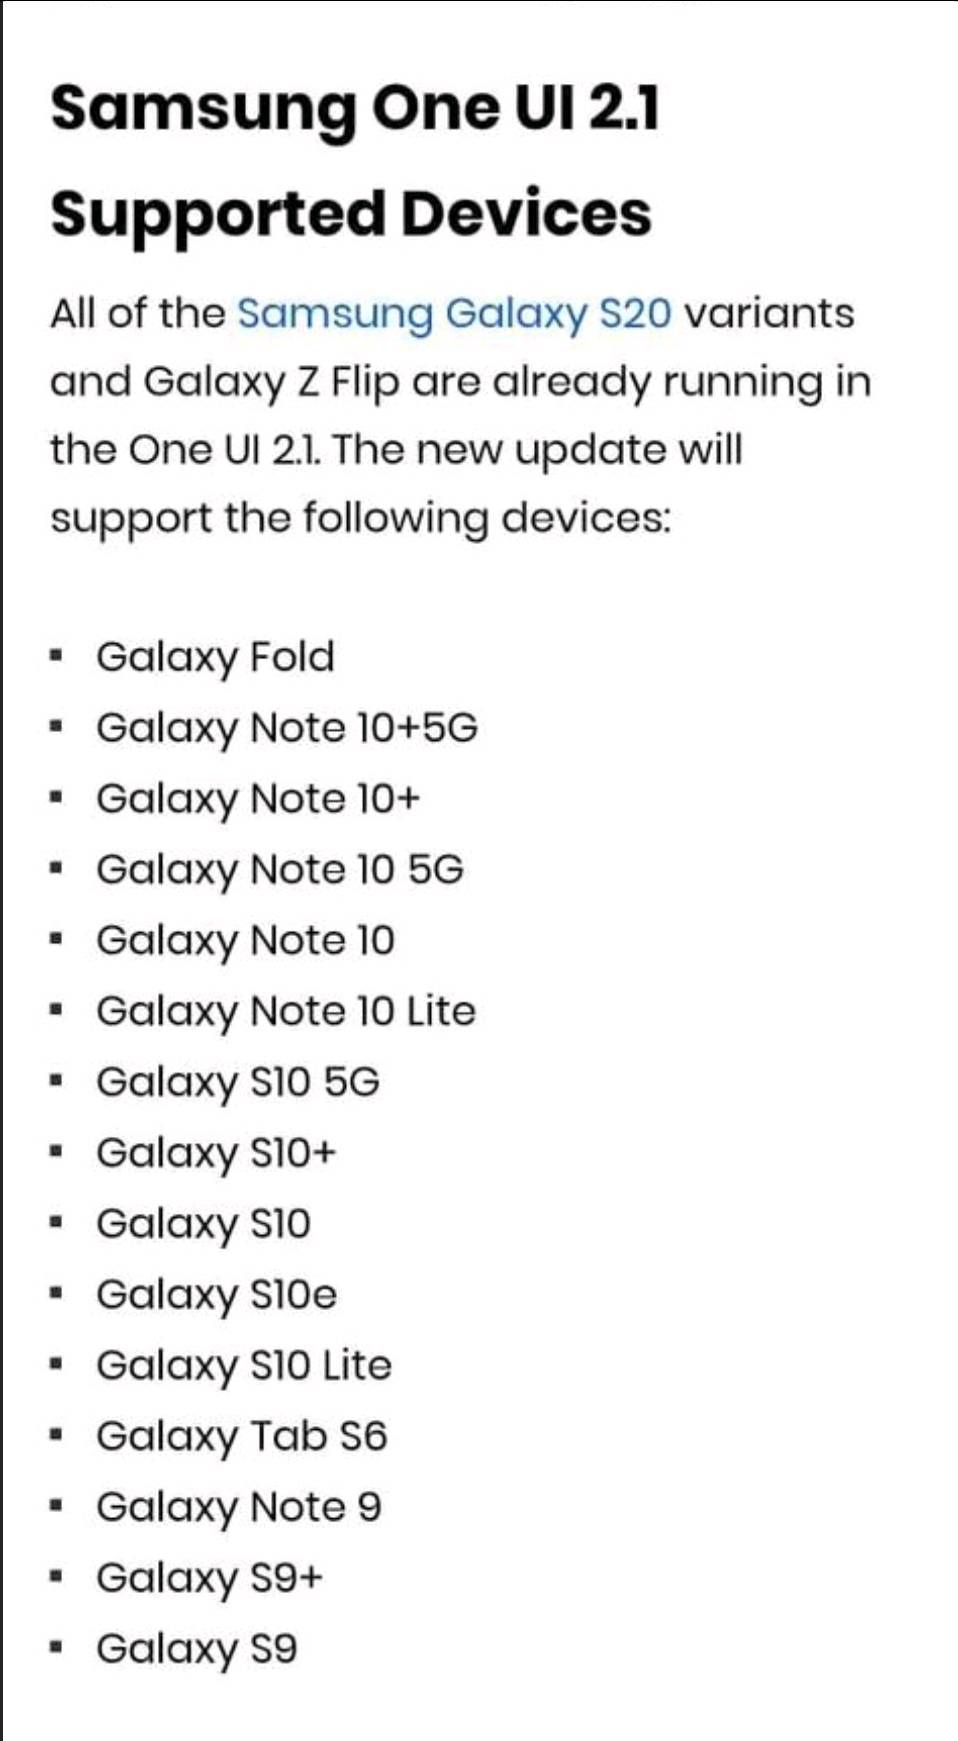 ONE UI 2.1 SUPPORTED DEVICE LIST 🔥❤ - Samsung Members